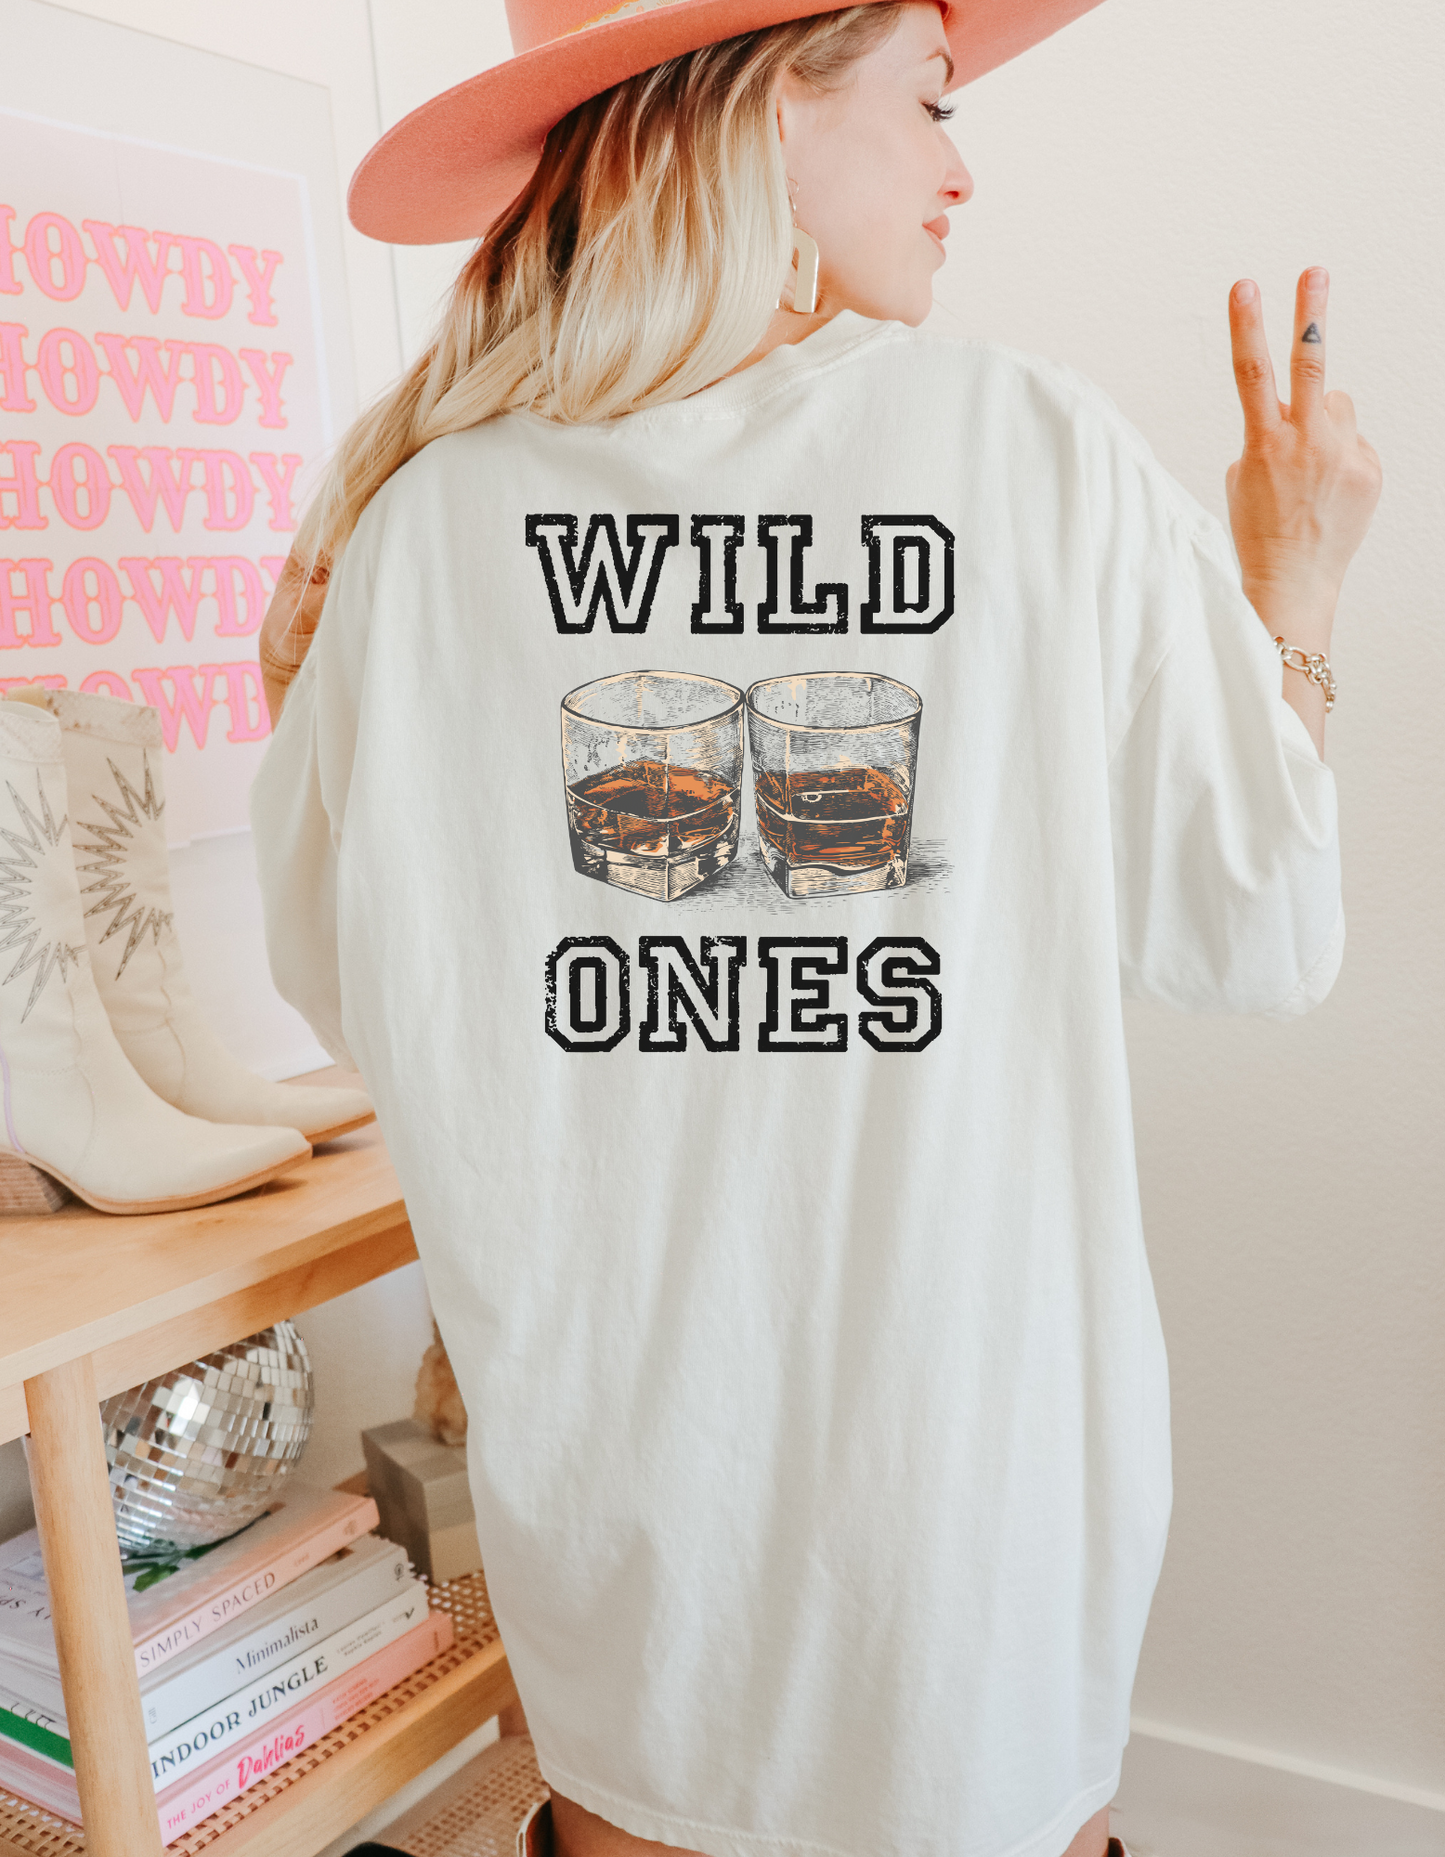 Cowgirls don't cry - wild ones tshirt front and back